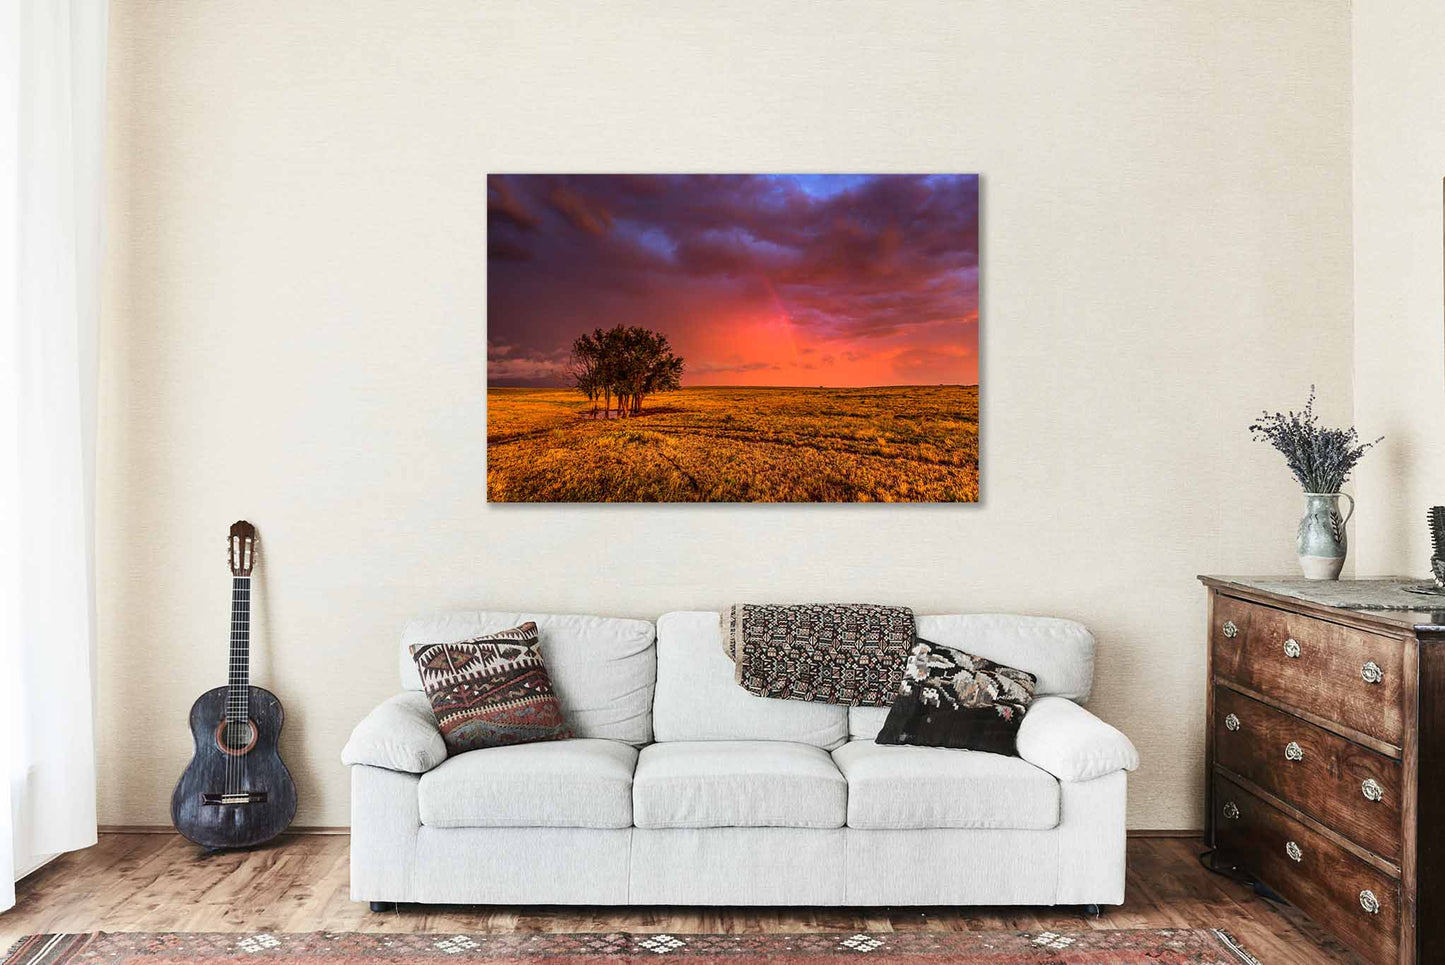 Great Plains Metal Print - Picture of Stormy Sky with Rainbow Over Grove of Trees in Oklahoma Prairie Wall Art Nature Decor